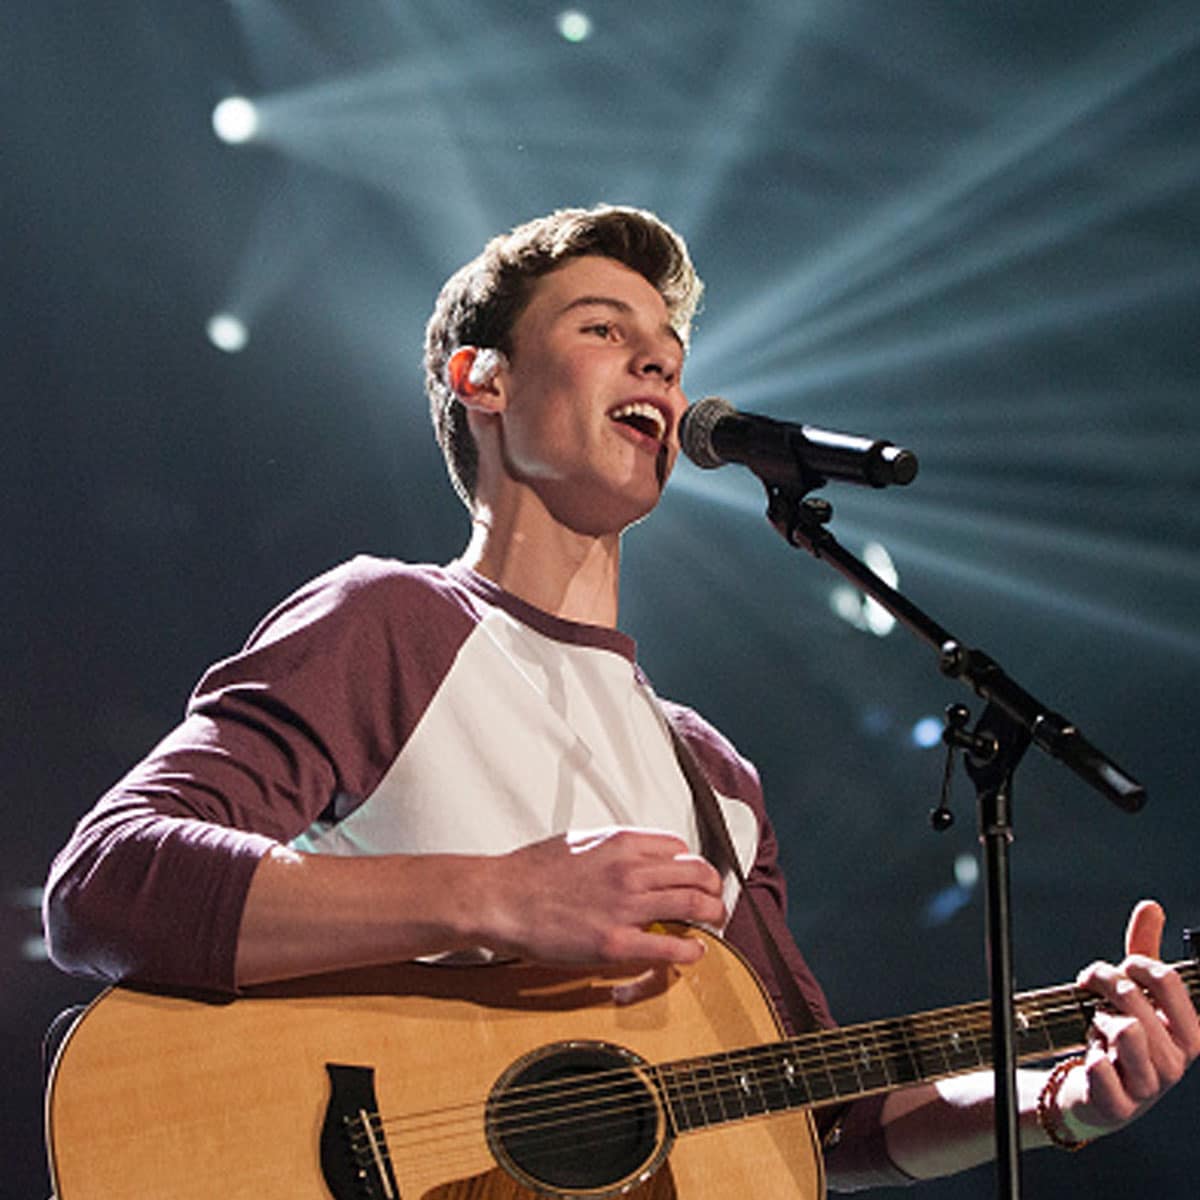 Shawn Mendes performs onstage during 103.5 KISS FM's Jingle Ball 2014